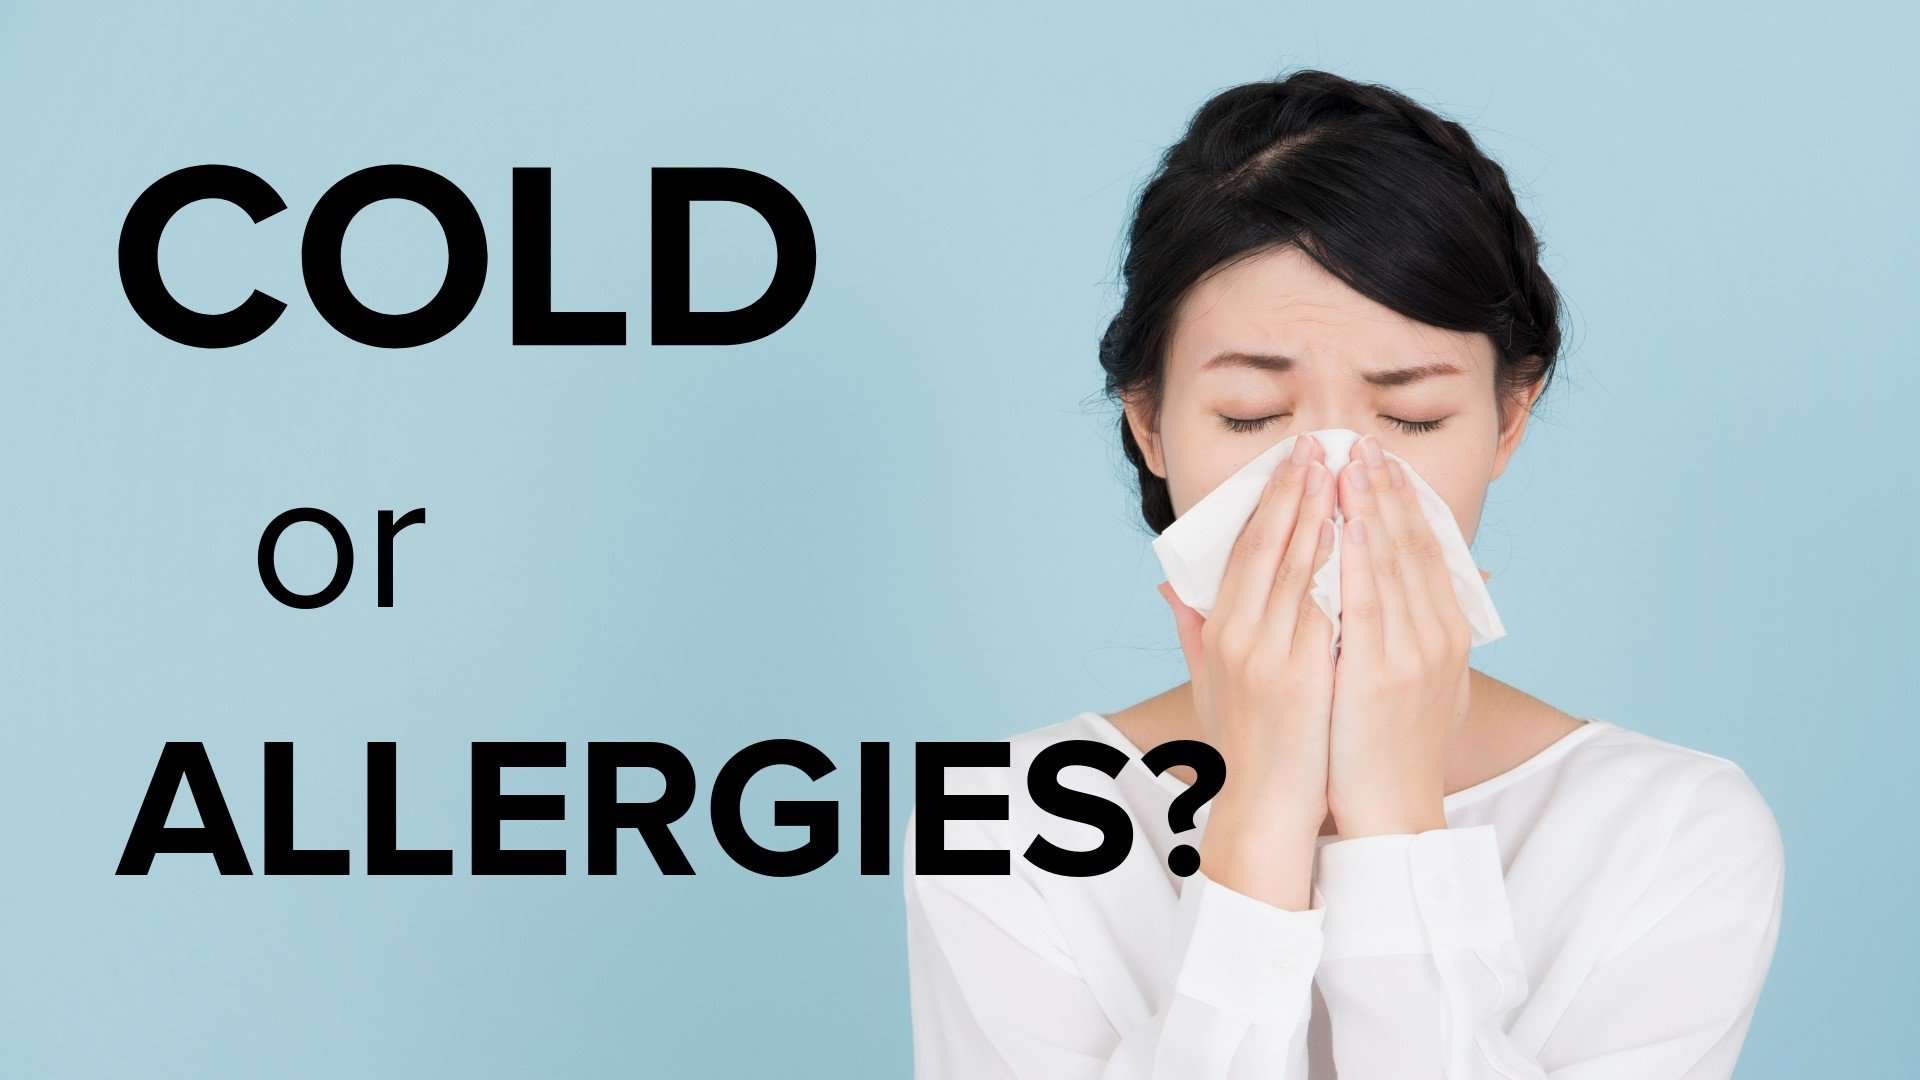 Cold or allergies: How to tell what